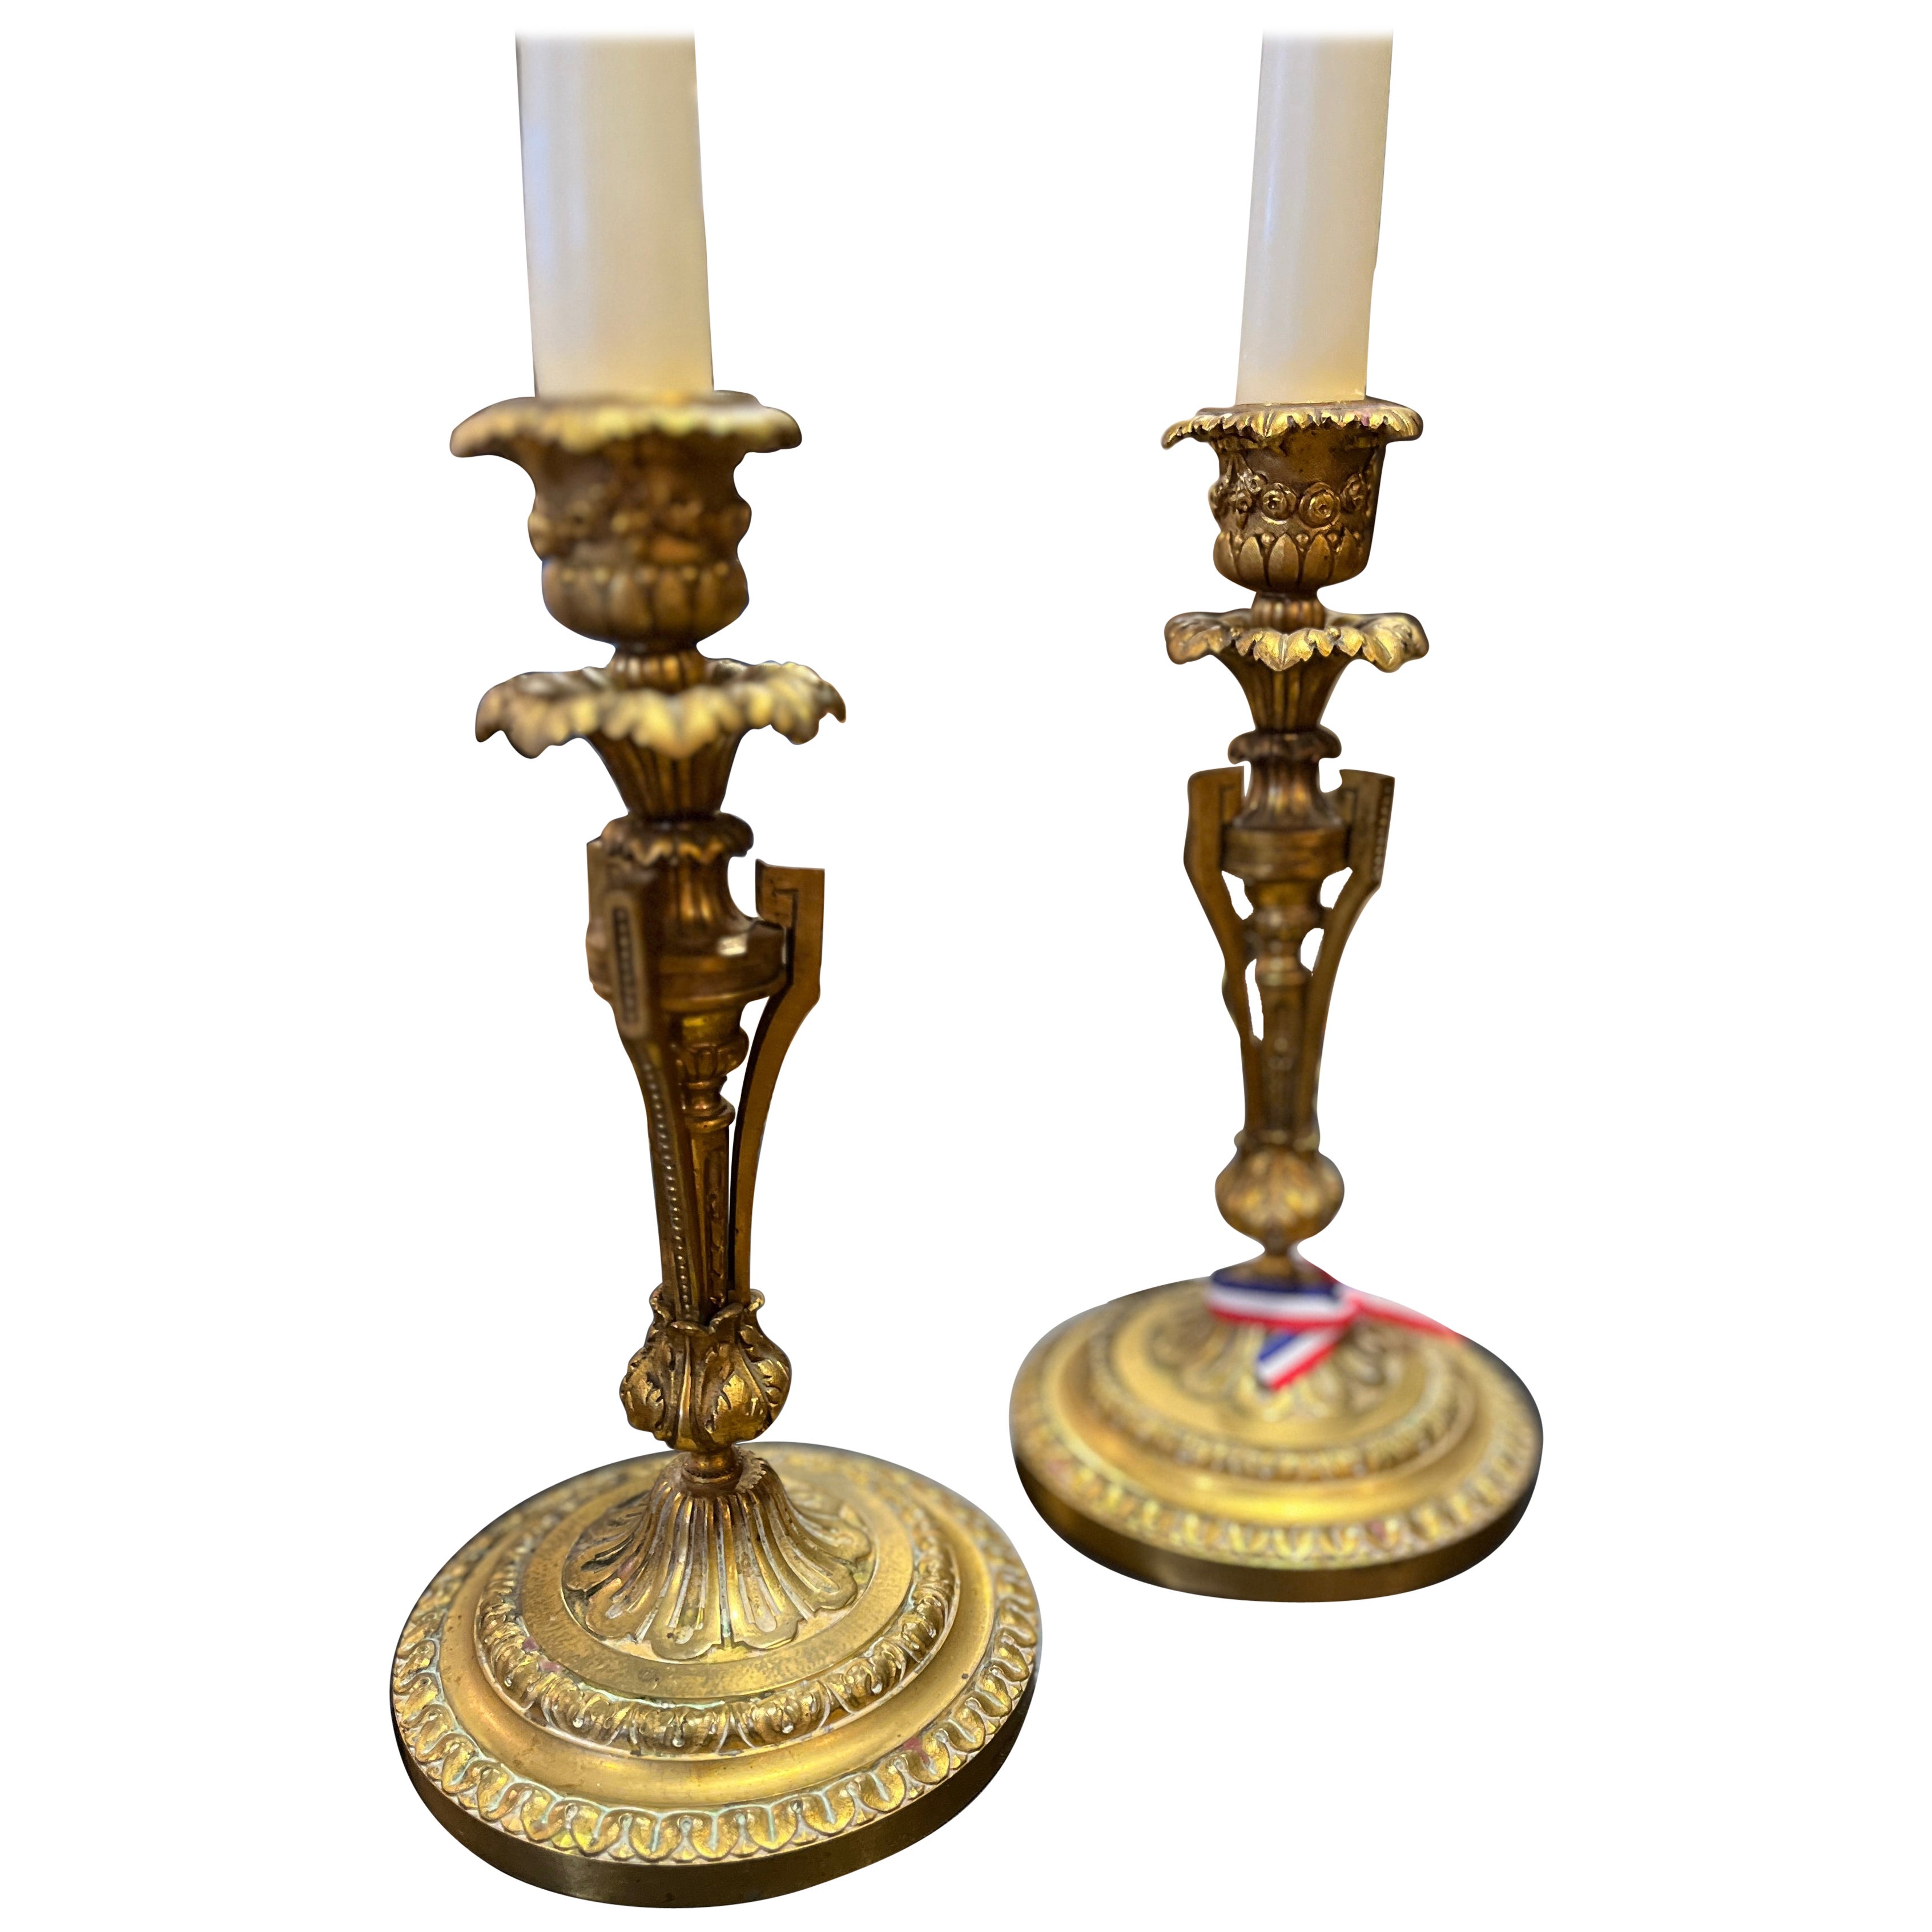 Antique French Ormalu Pair of Candleholder